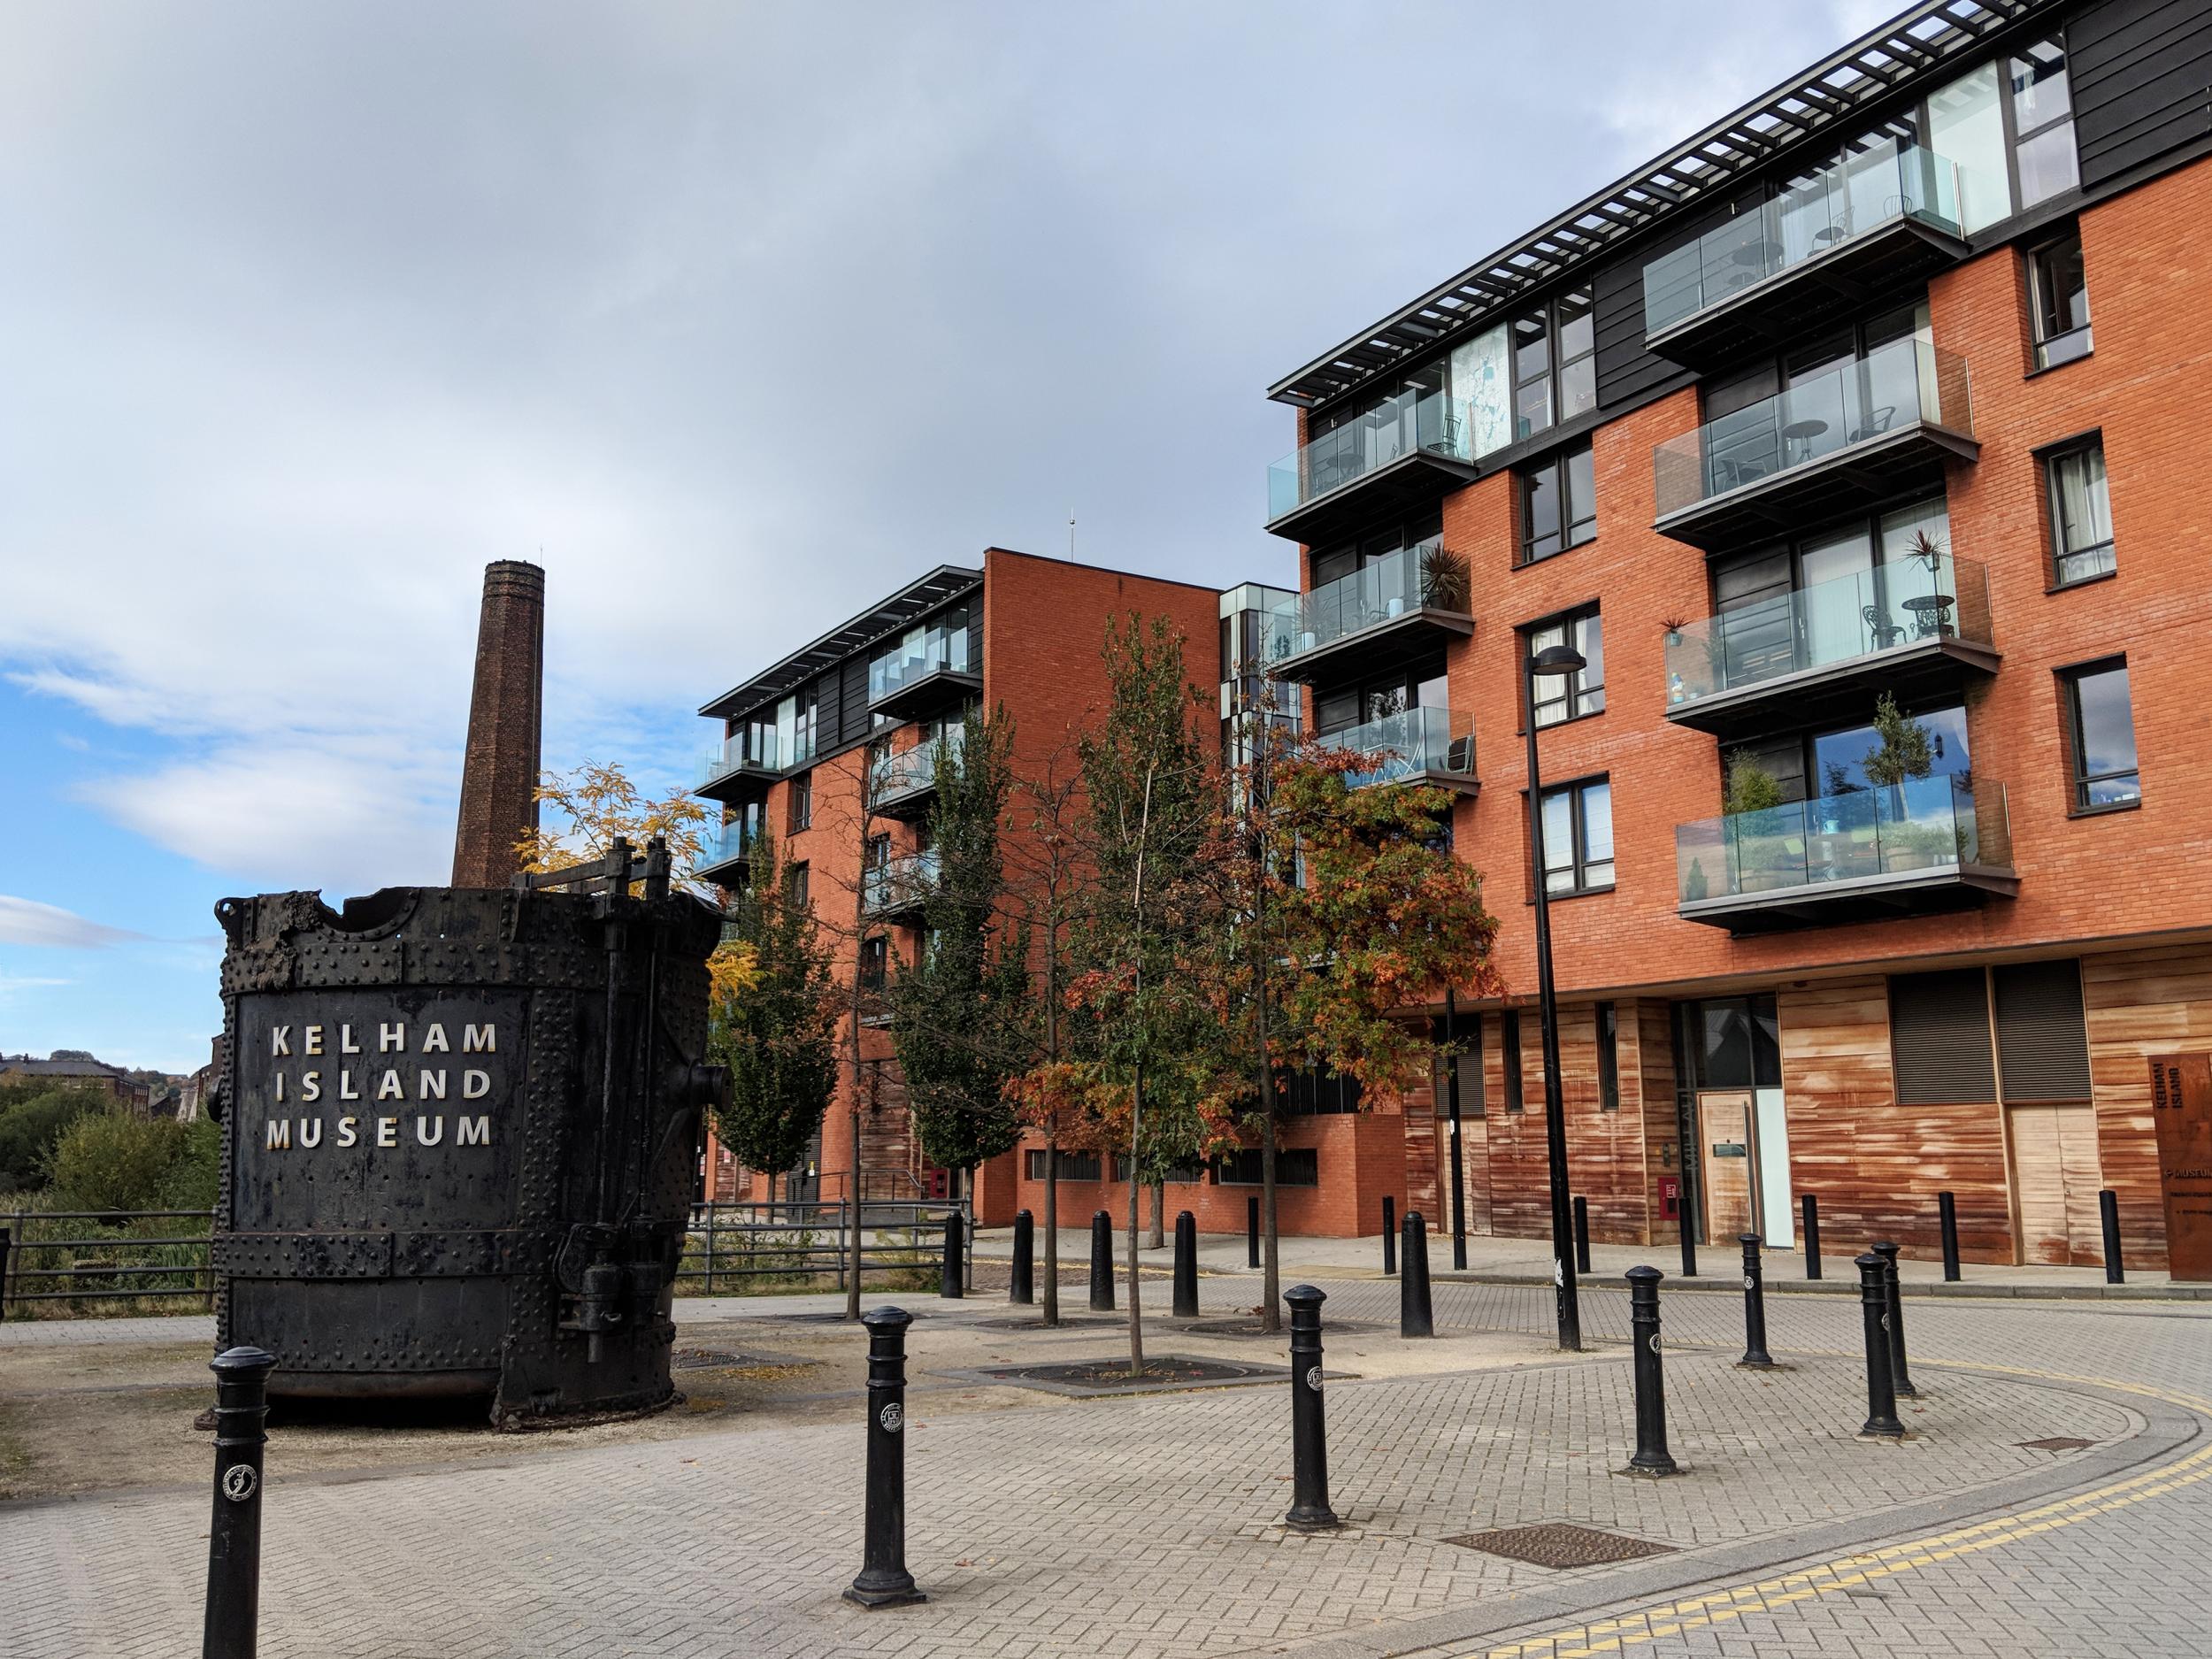 Kelham Island Quarter, one of the city’s oldest industrial areas